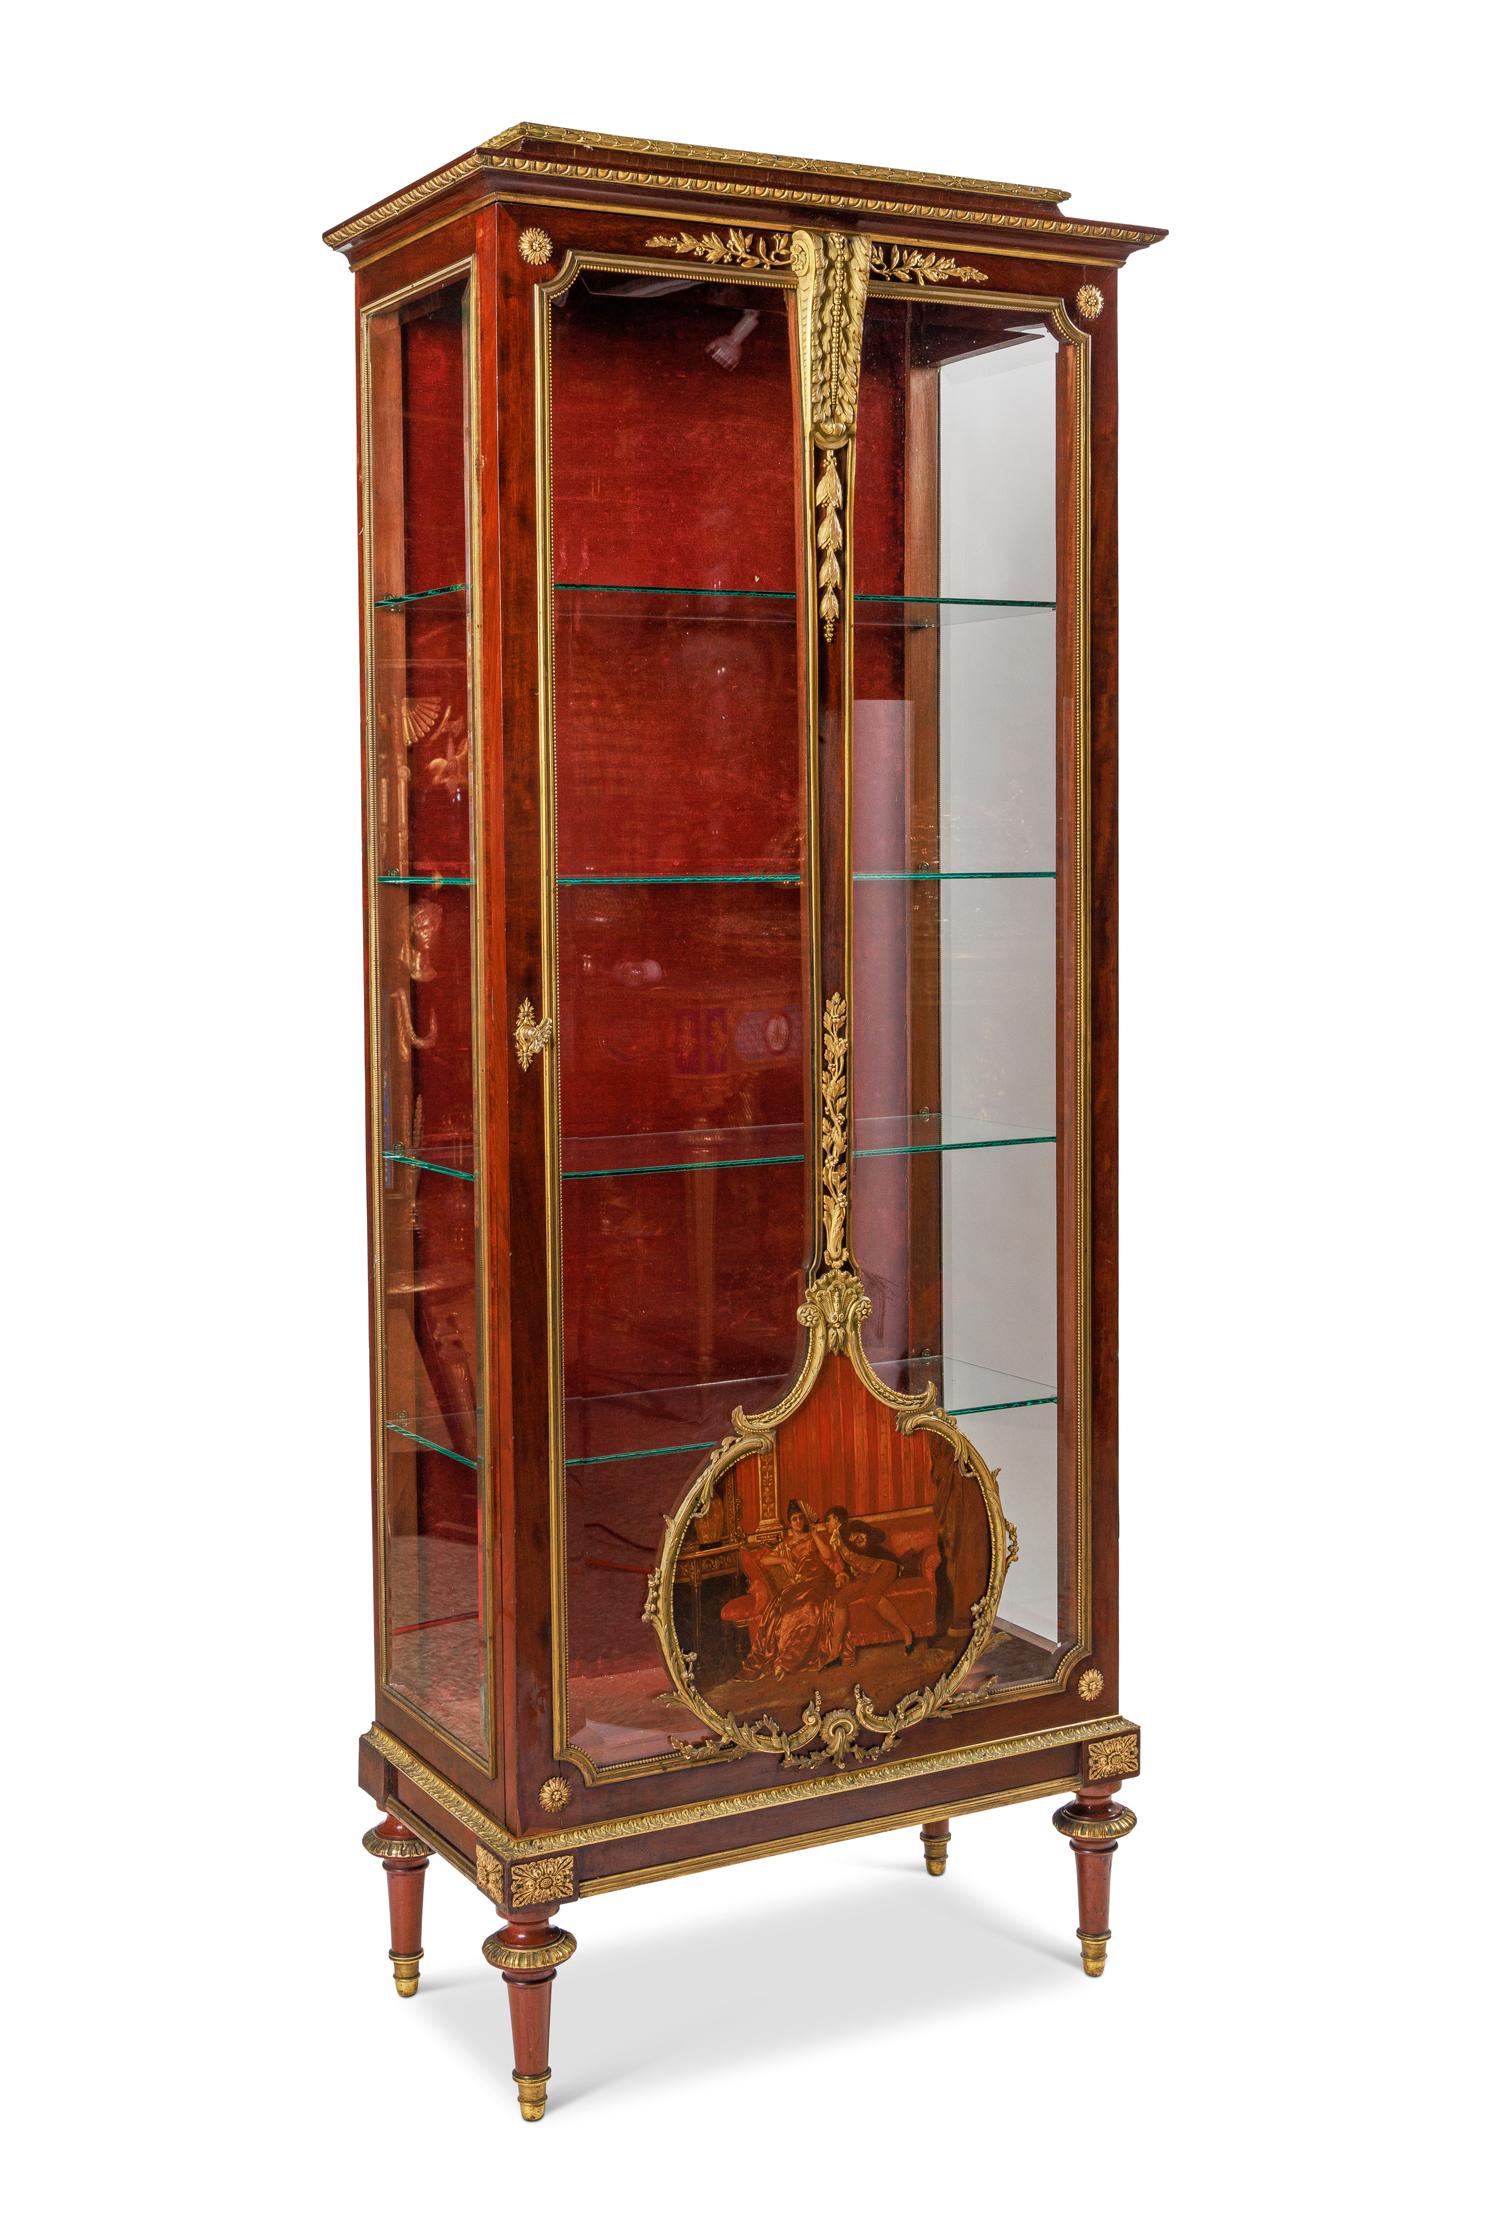 Louis Majorelle, an exceptional quality French Ormolu and Vernis Martin Vitrine, French, circa 1885

An exceptional quality vitrine, in the Louis XVI-style with jewel quality ormolu bronze mounts with beveled edge glass panels throughout. The door